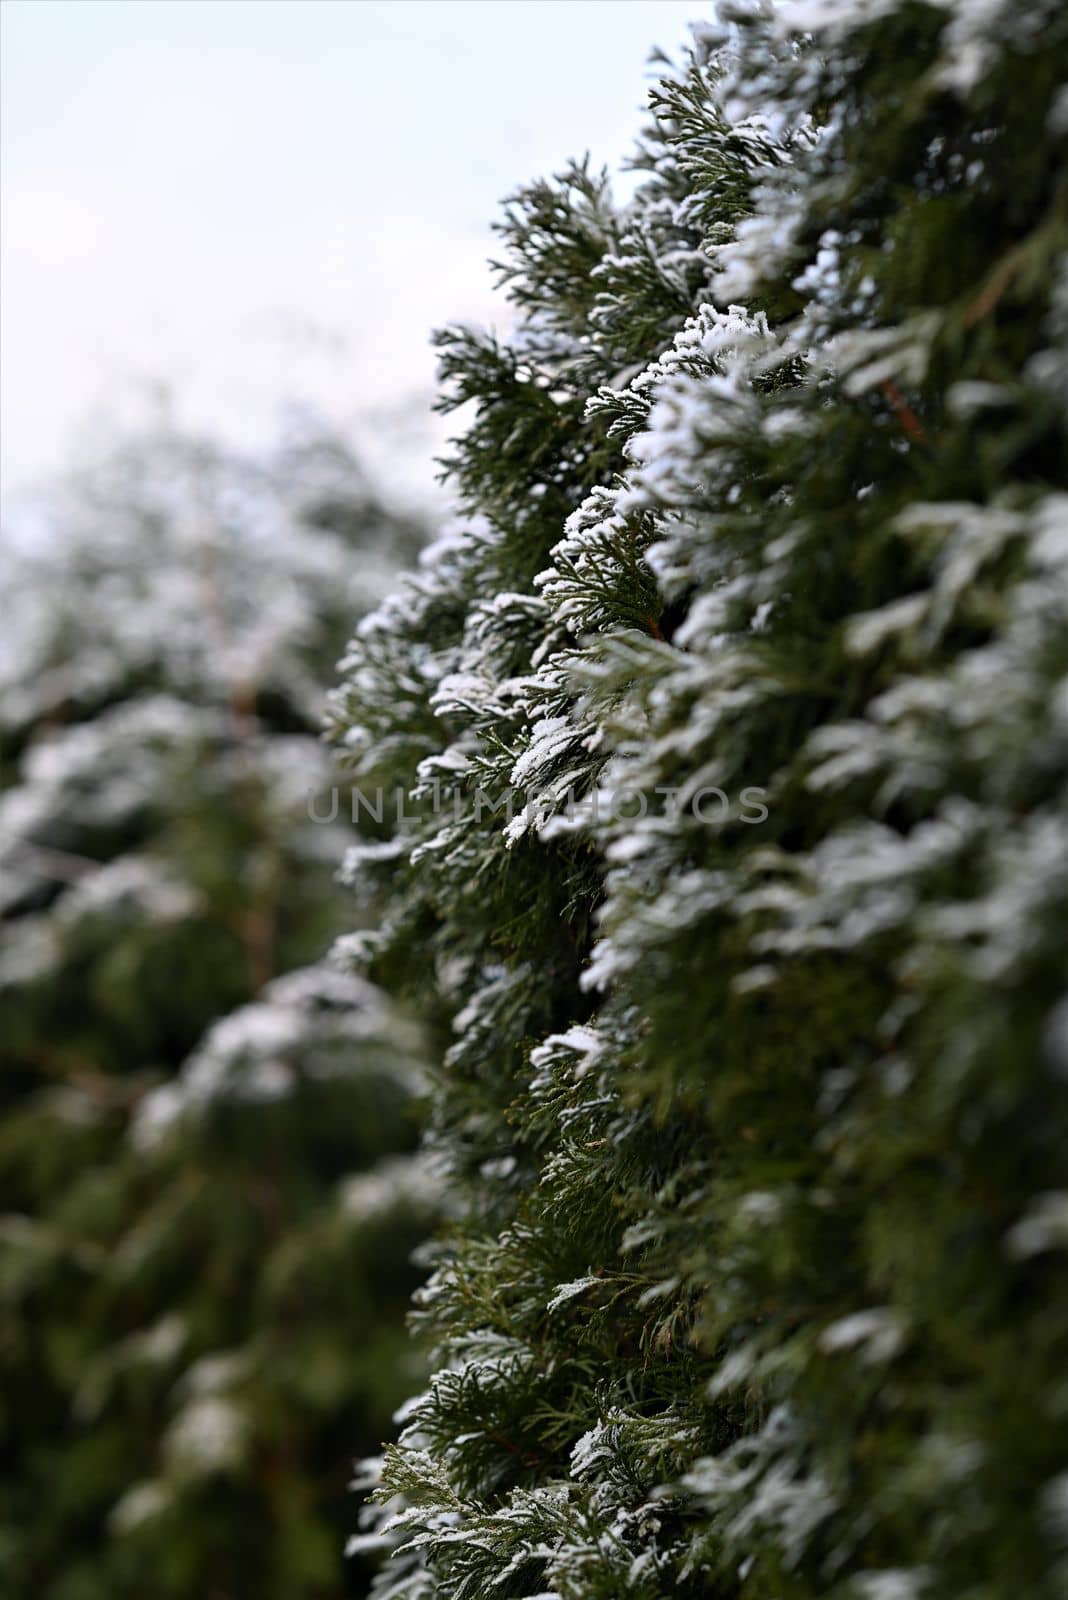 Thuja hedge with hoarfrost as a close up by Luise123